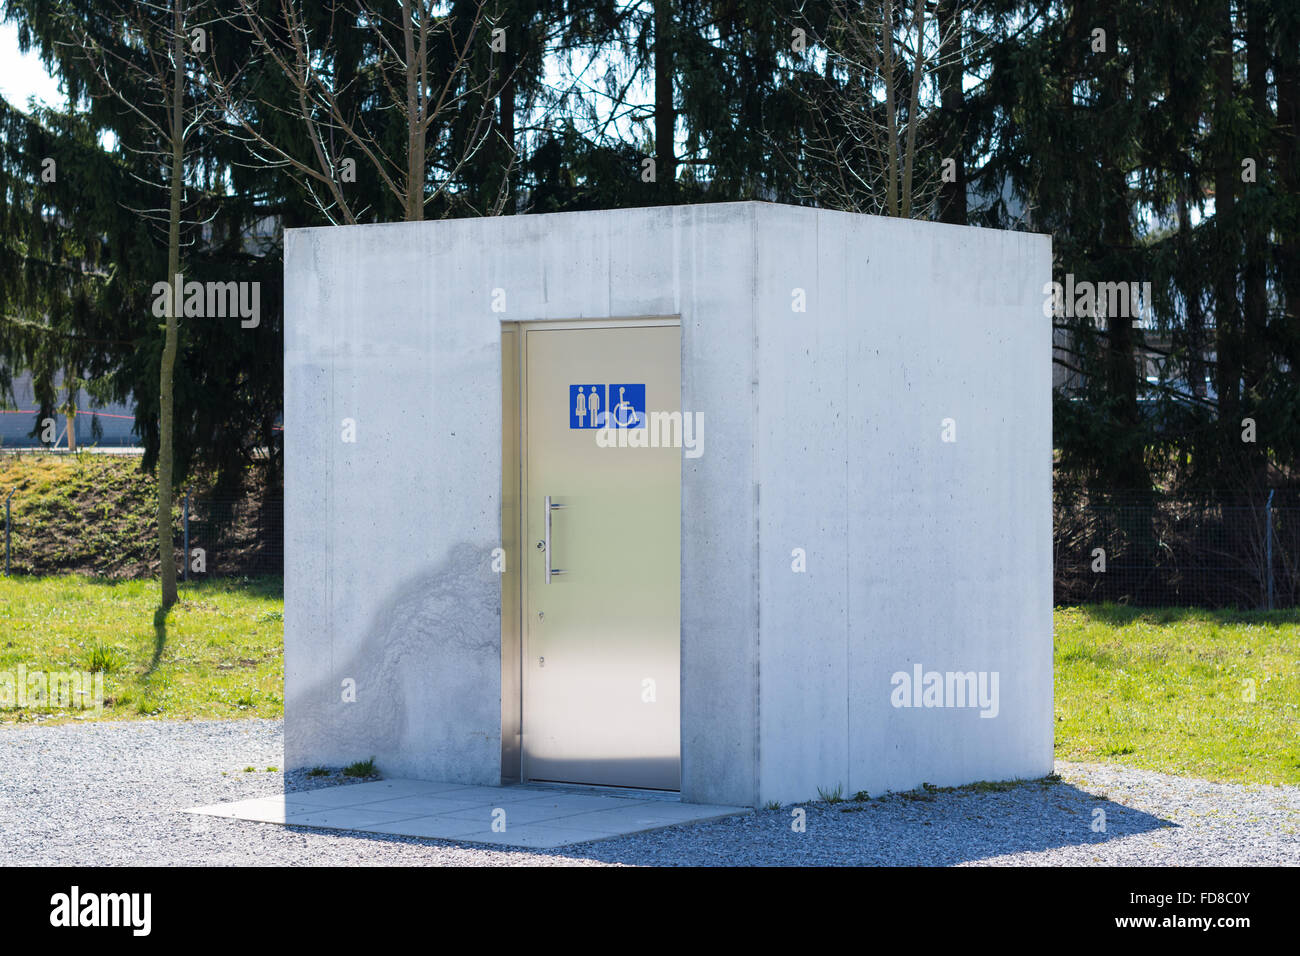 A cube shaped WC in a park. Simple design and construction Stock Photo